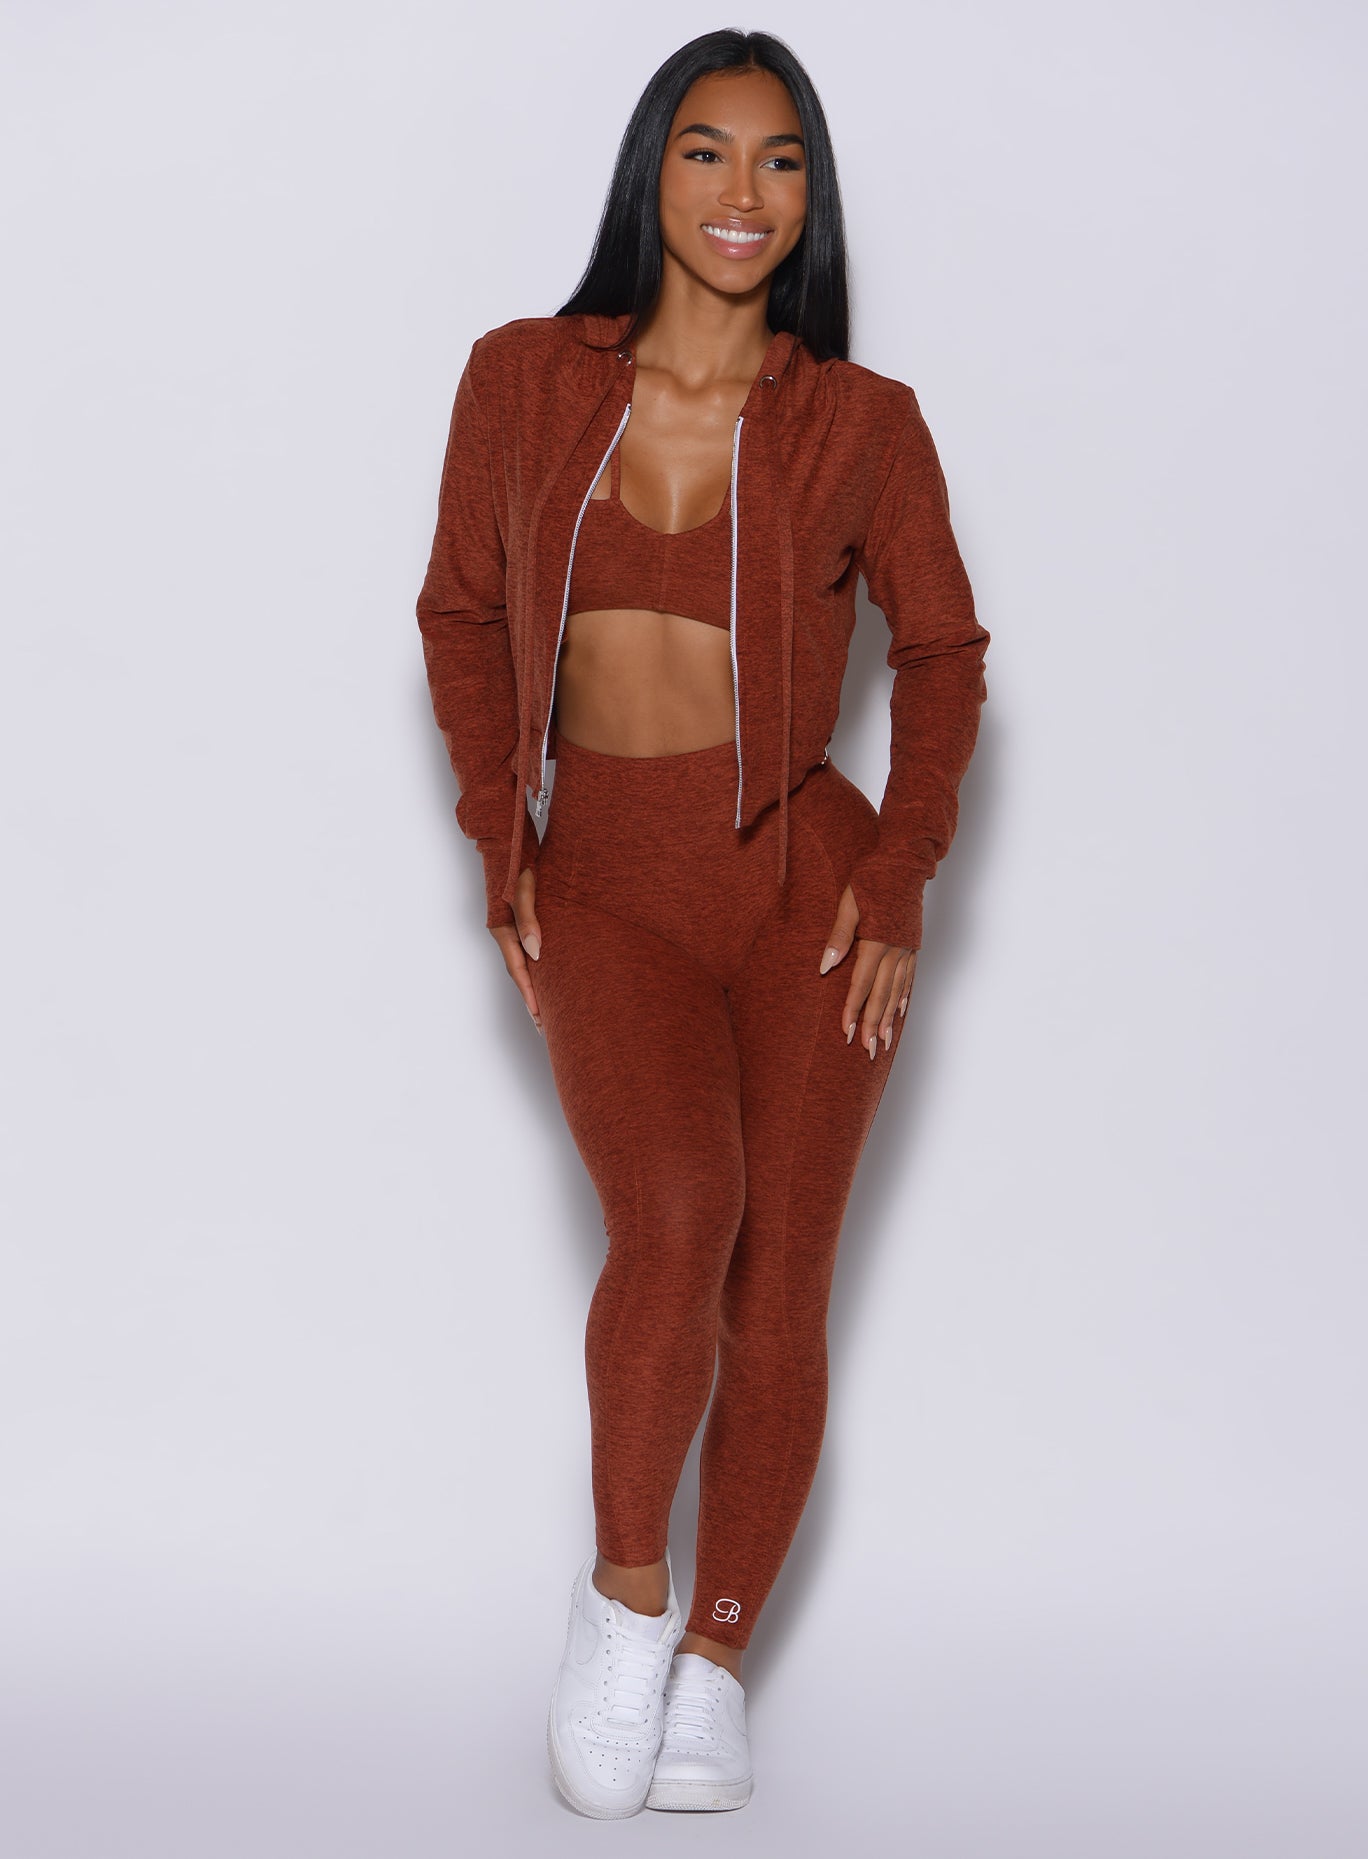 Front profile view of a model in our cloud leggings in Cinnamon color along with a matching bra and jacket